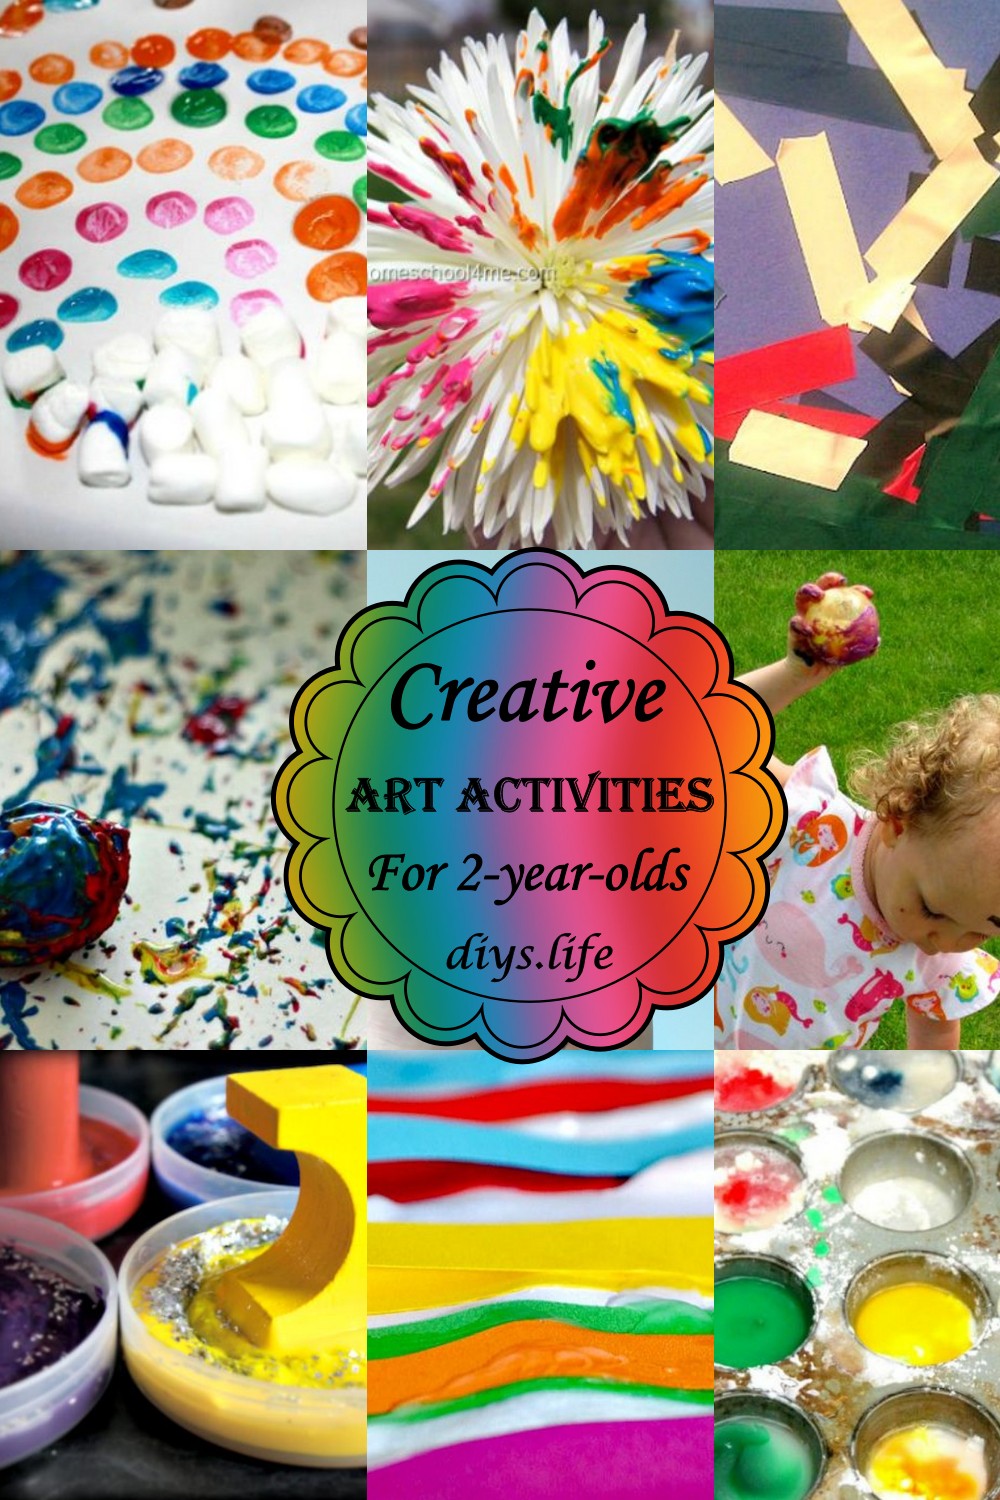 Creative Art Activities For 2-year-olds